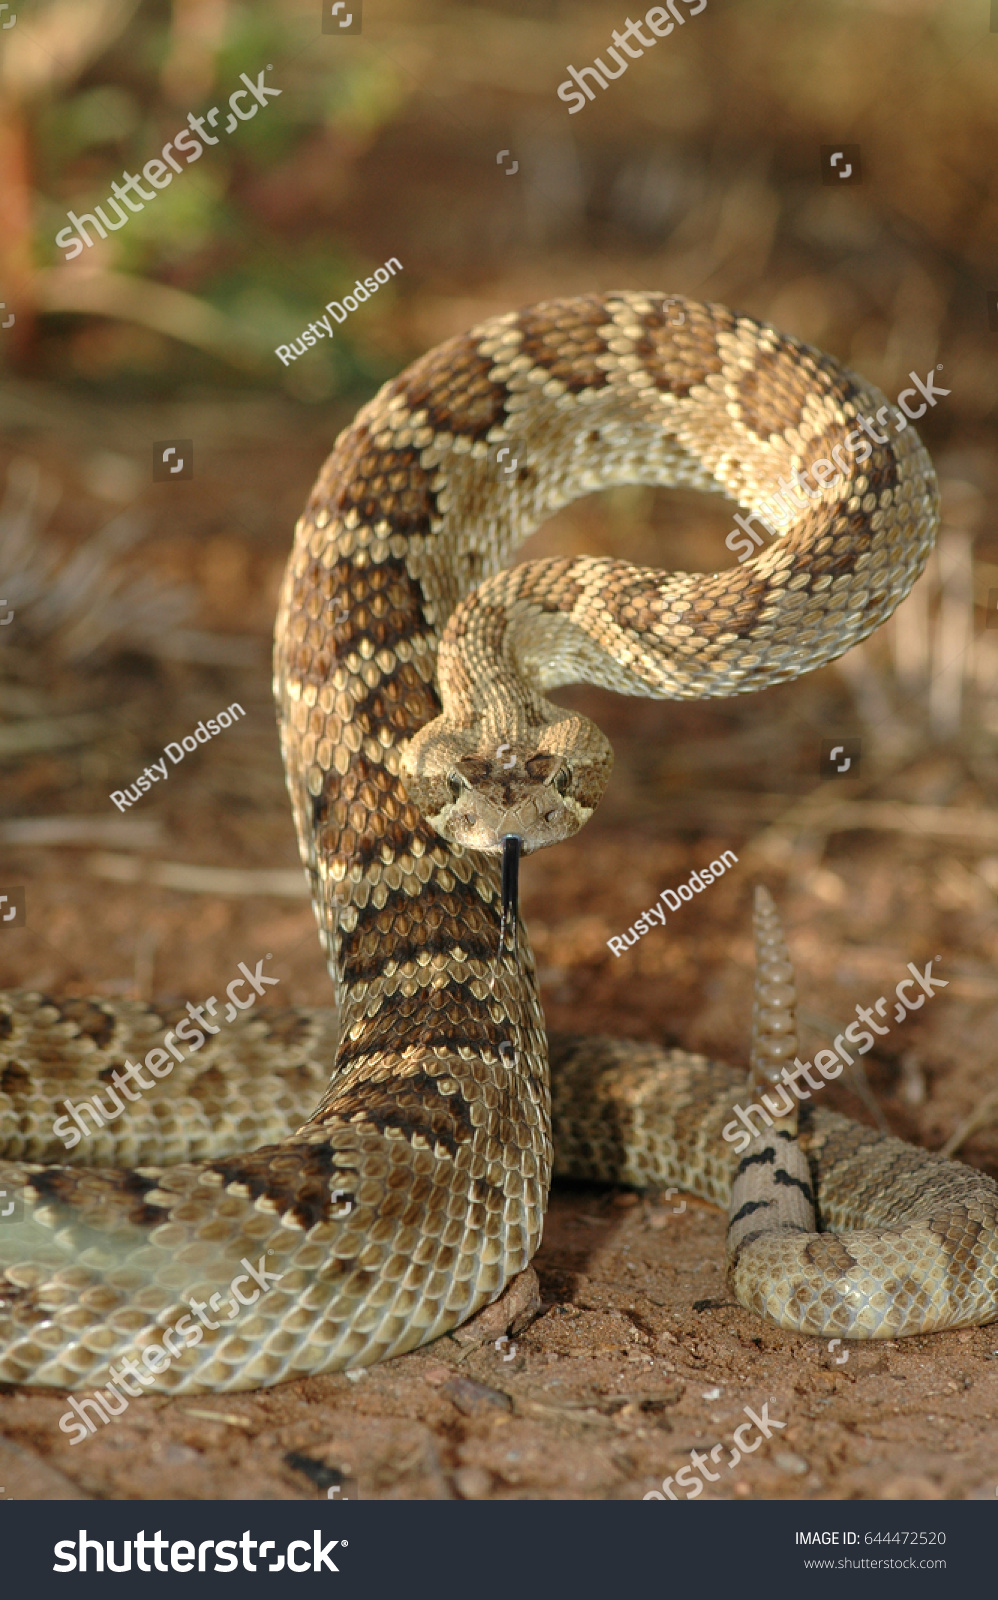 This mojave rattlesnake is displaying it's defense posture. #644472520